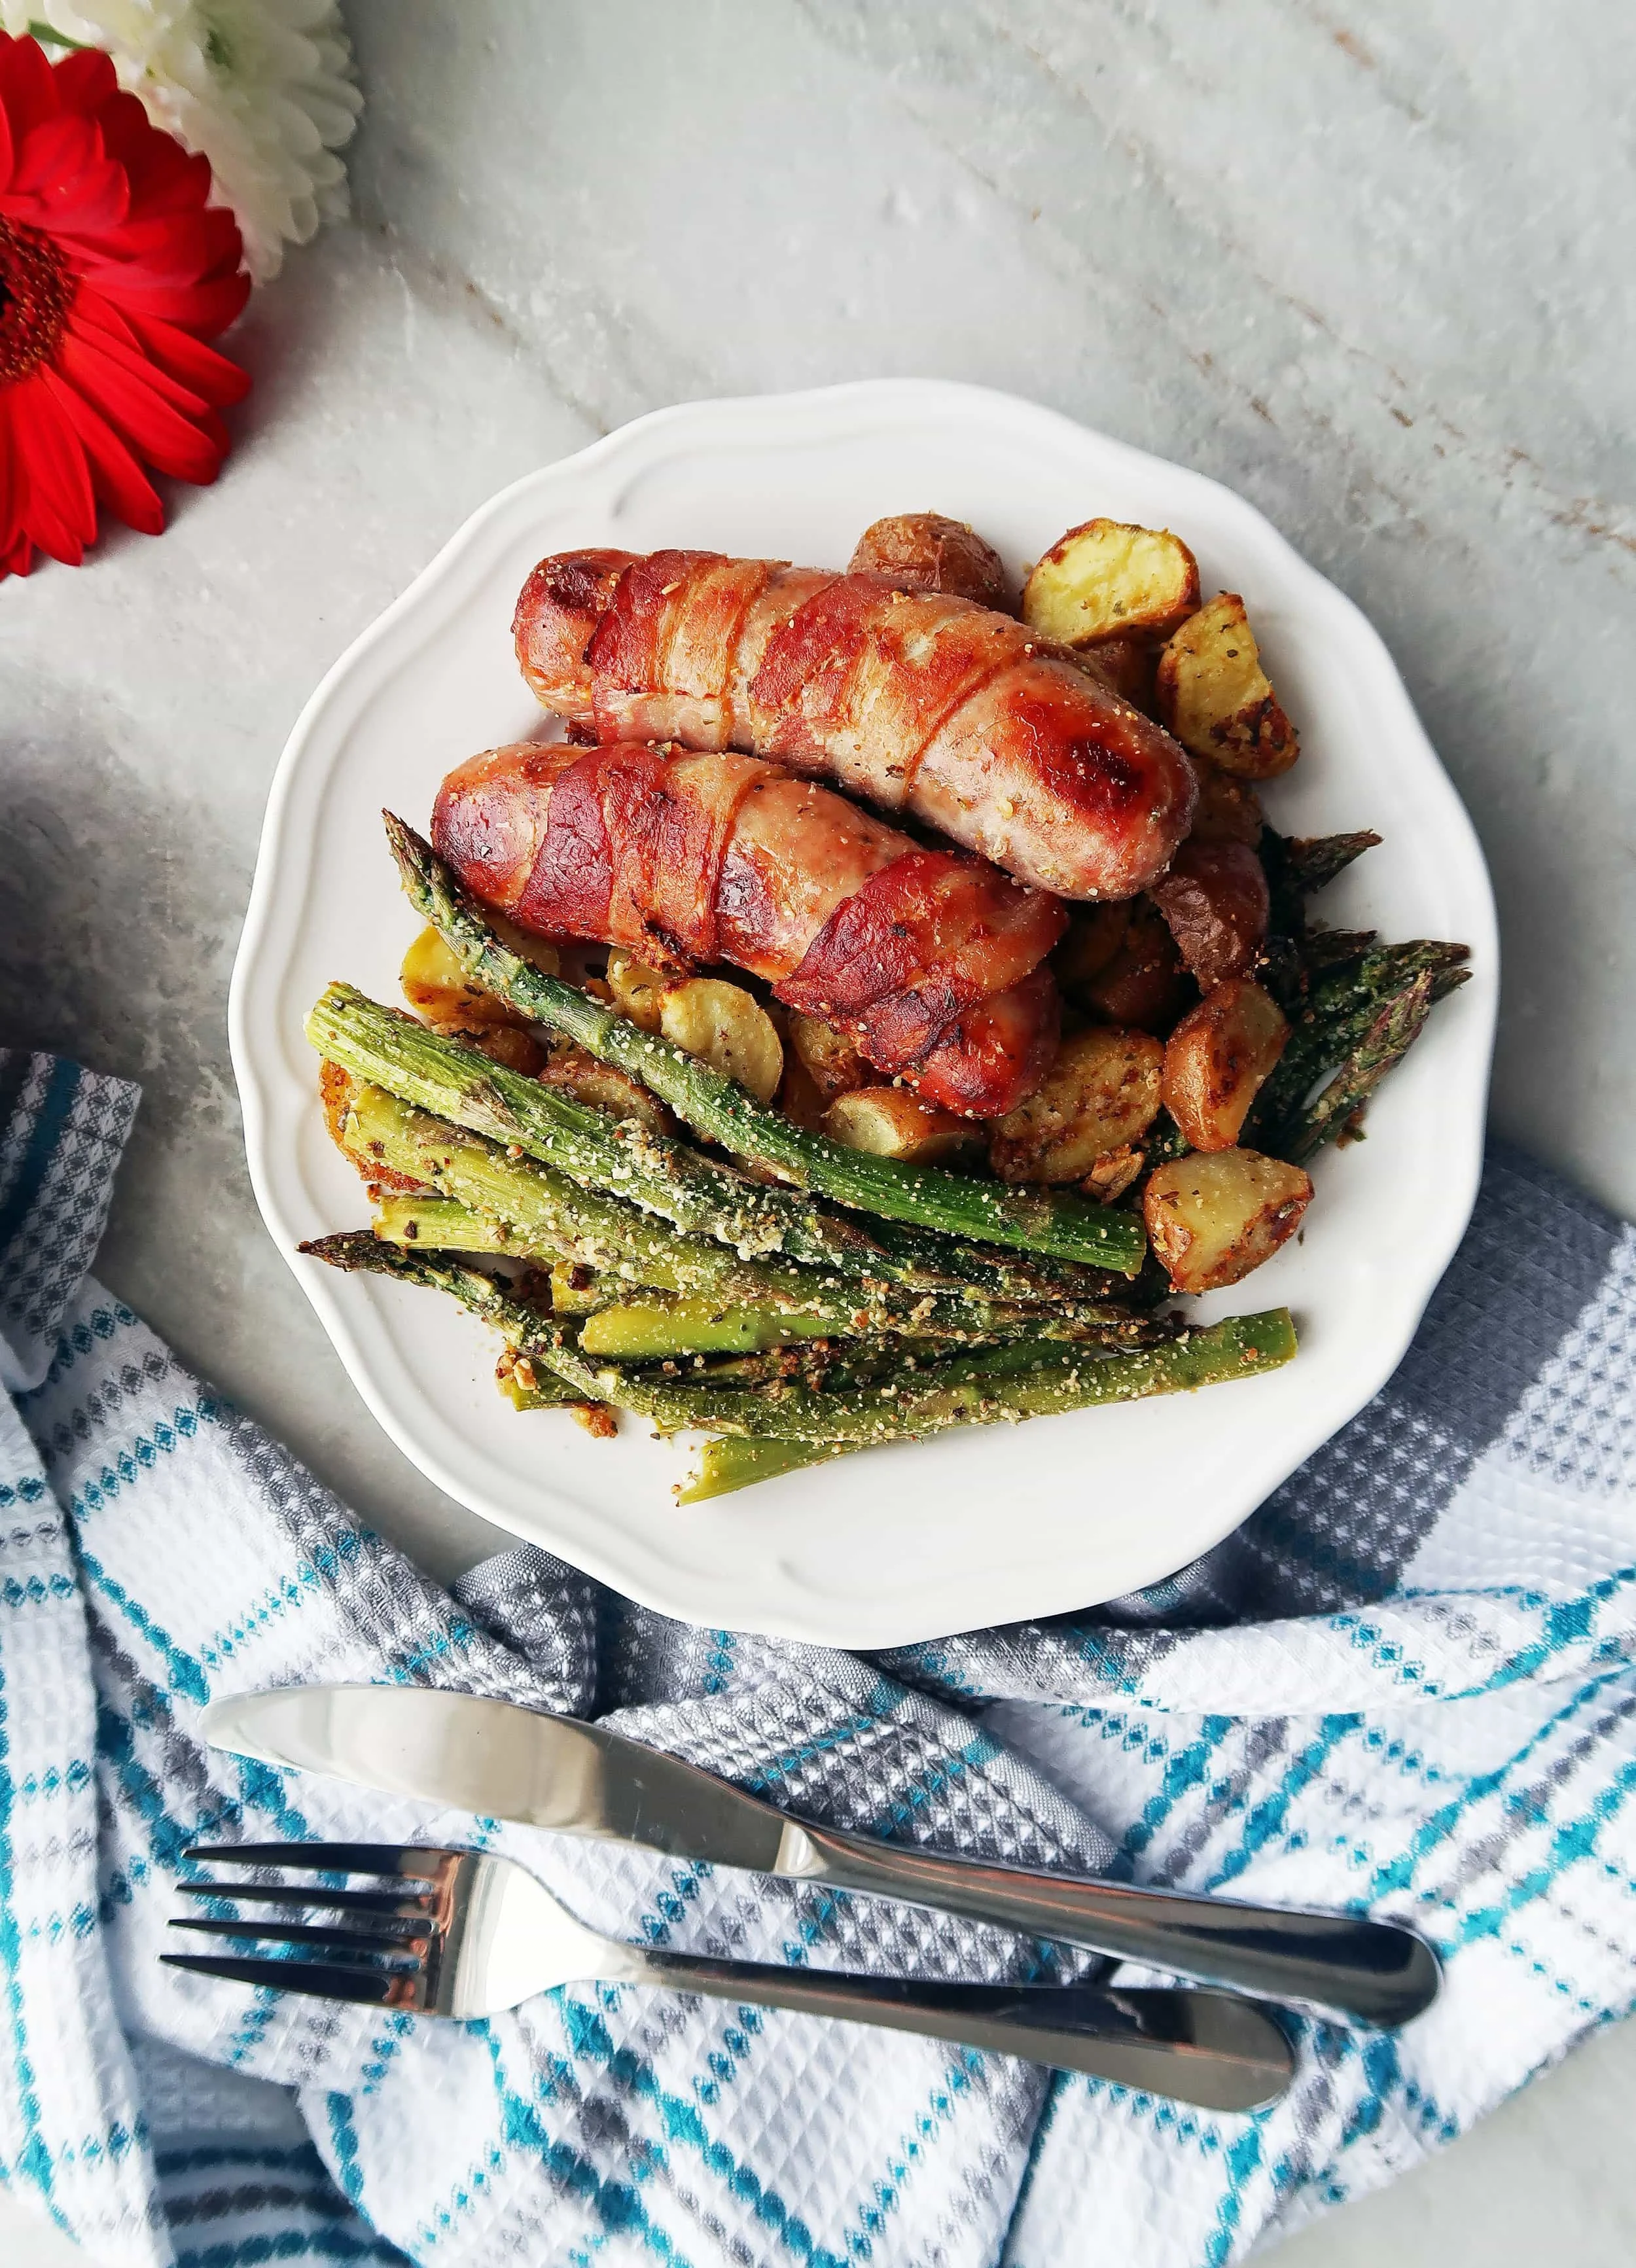 A plate of Bacon-Wrapped Sausages with Garlic Parmesan Asparagus and Potatoes